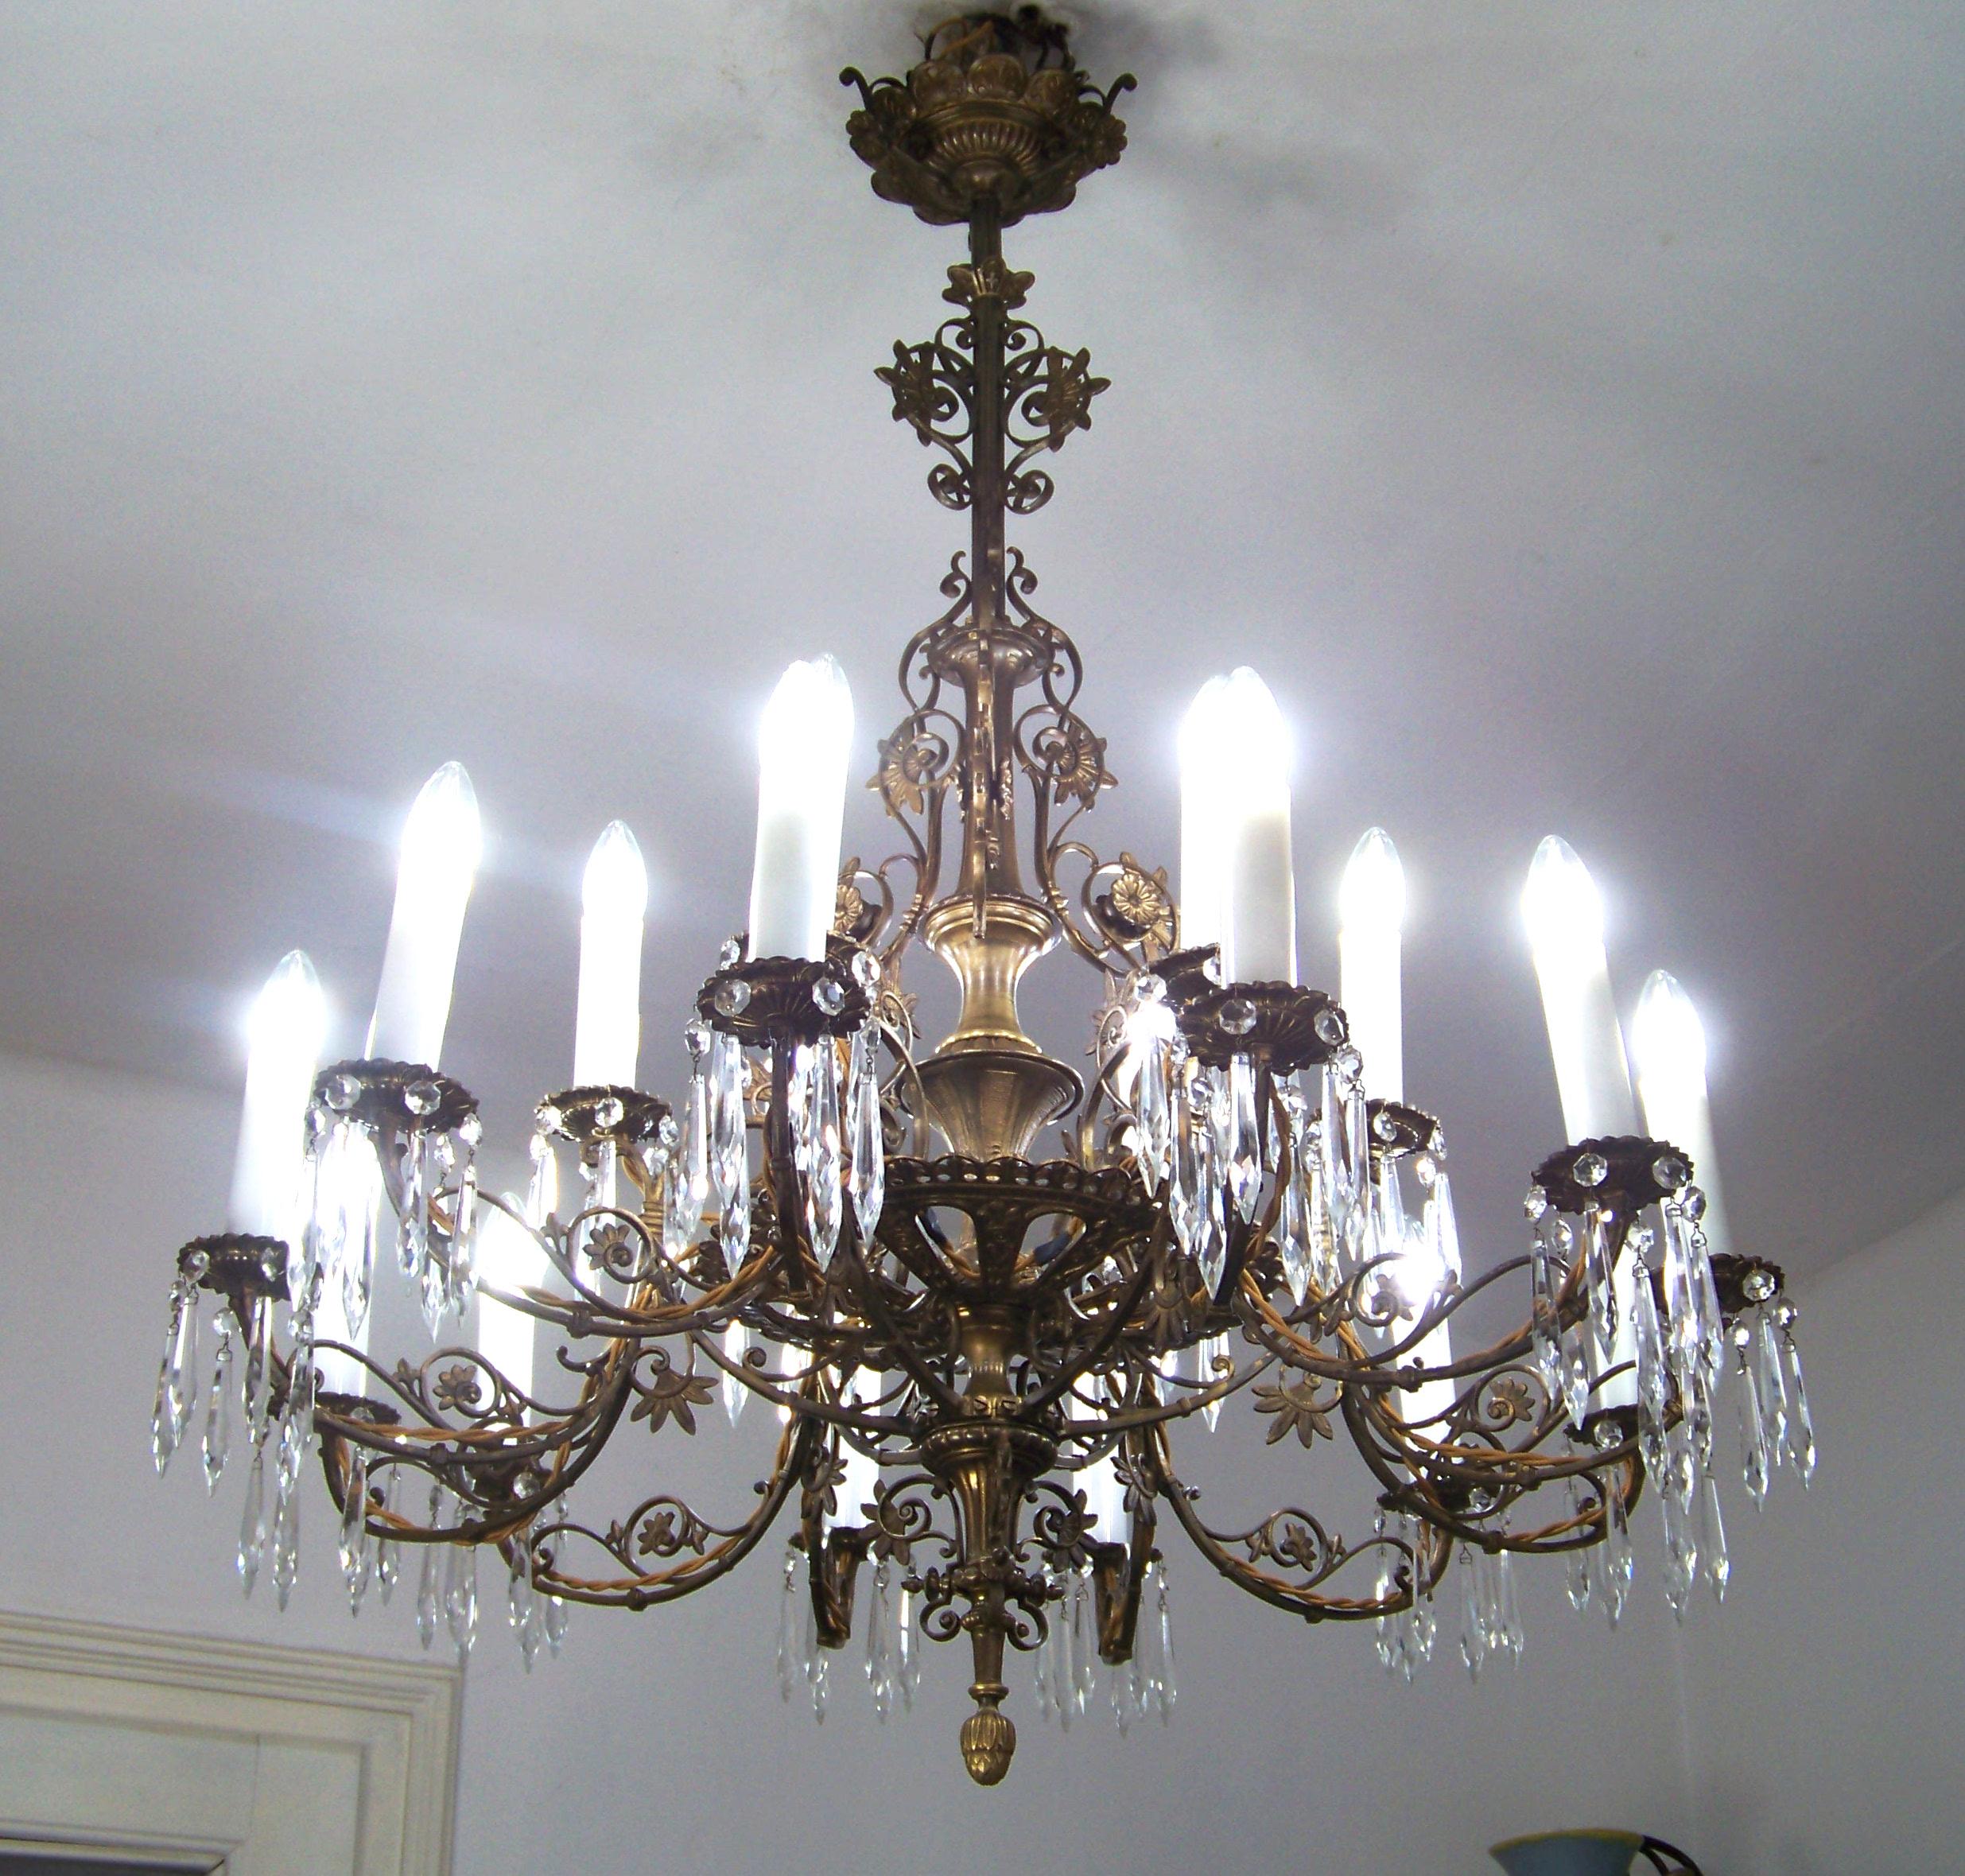 According to unverified information, it comes from the estate of Mons. Kajetán Matoušek and was allegedly placed in the parish of St. Vojtech in Prague. It was made in the second half of the 19th century and was originally a candle chandelier.